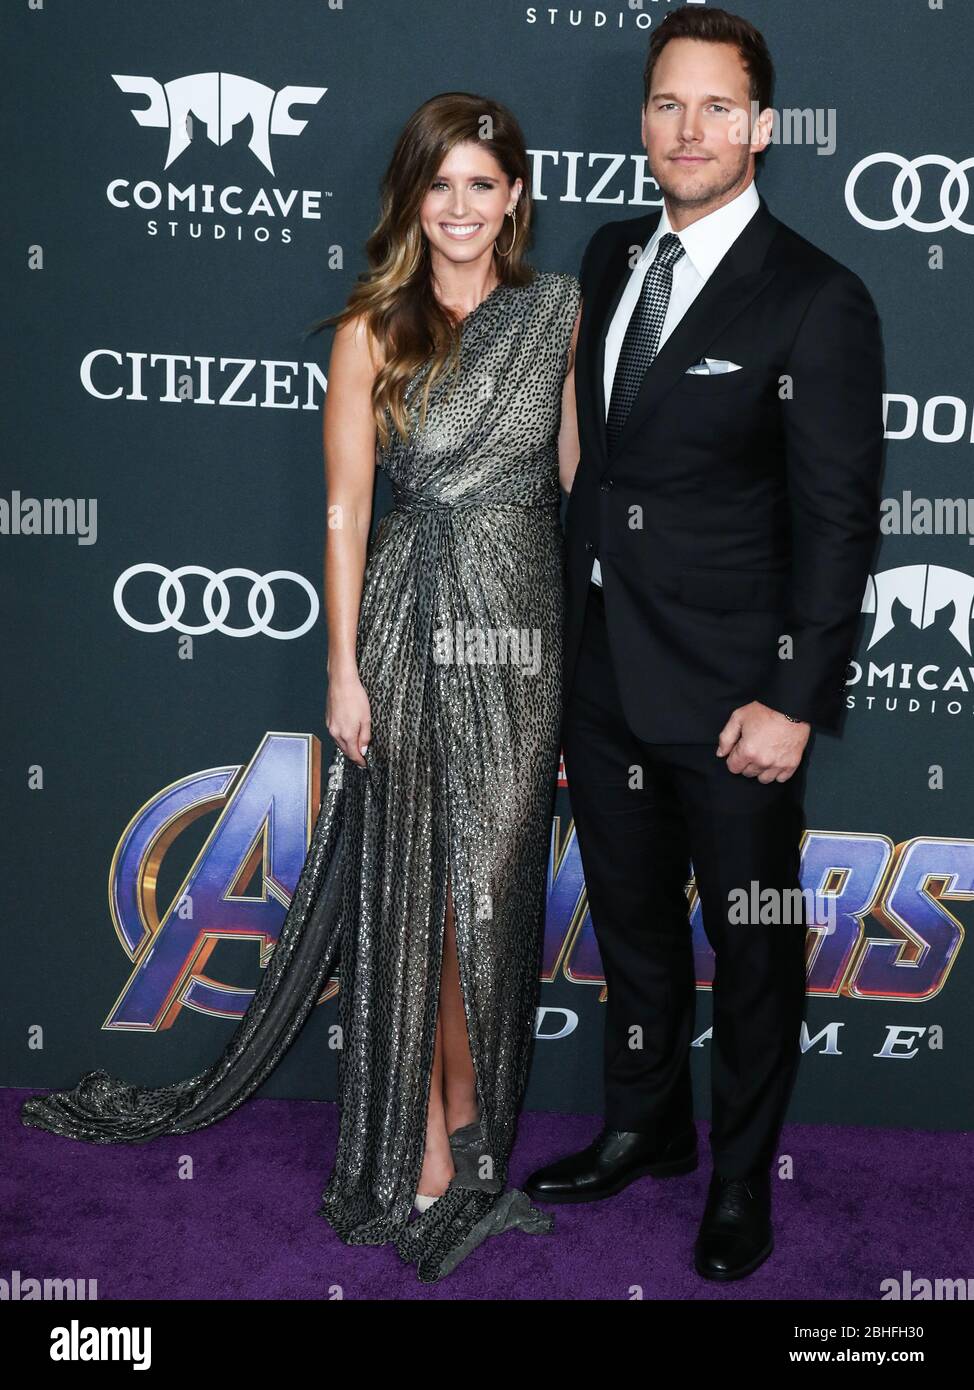 Los Angeles, California, USA. 22nd April, 2019. (FILE) Katherine Schwarzenegger and Chris Pratt Expecting First Child Together. This will be the first baby for Katherine and the second for Chris, who shares his son Jack with ex-wife Anna Faris. Credit: Image Press Agency/Alamy Live News Stock Photo